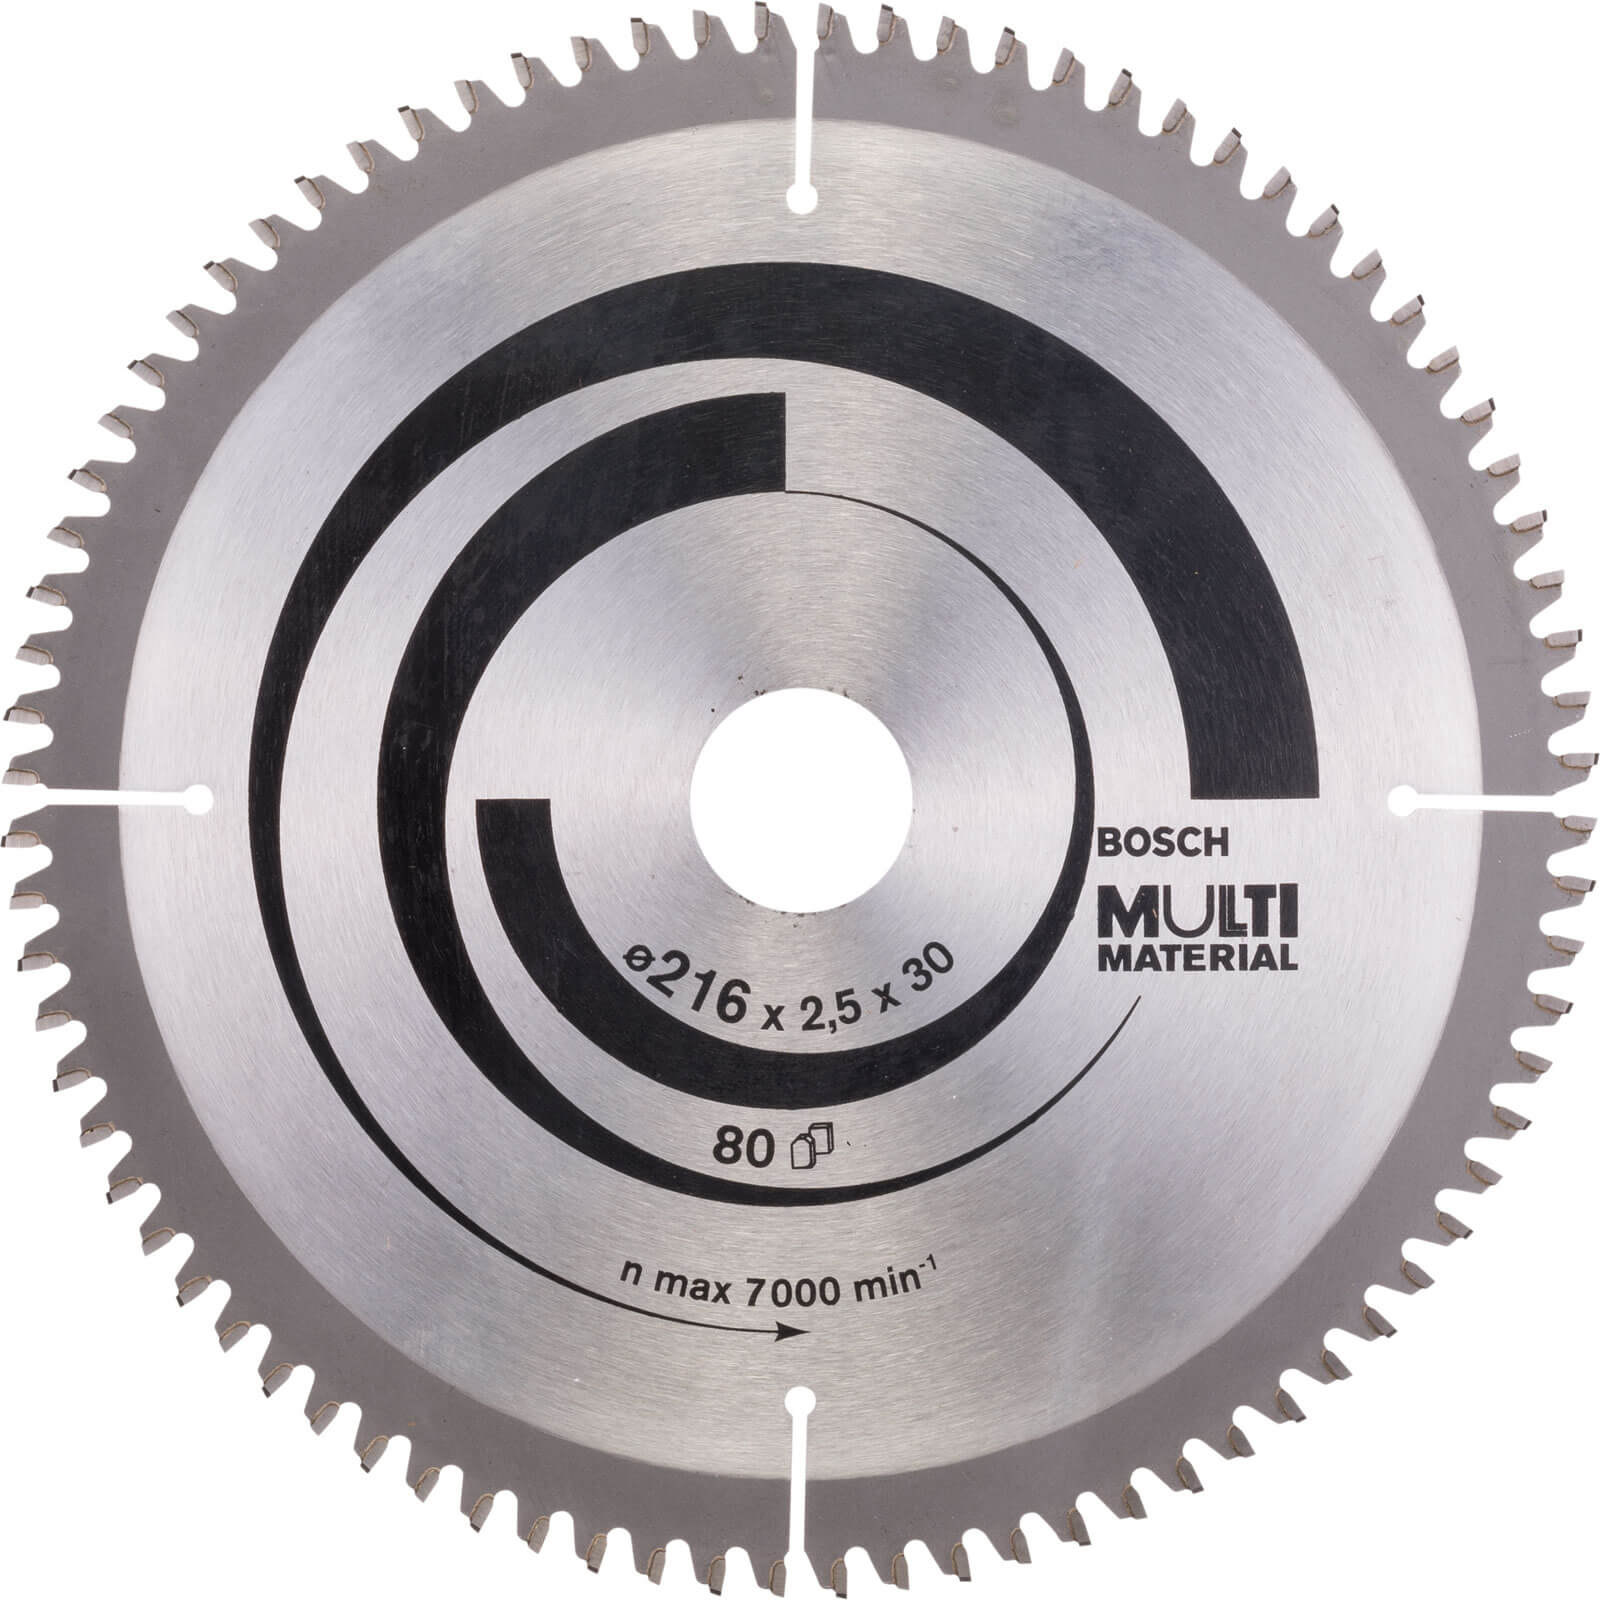 Image of Bosch Multi Material Cutting Mitre and Table Saw Blade 216mm 80T 30mm